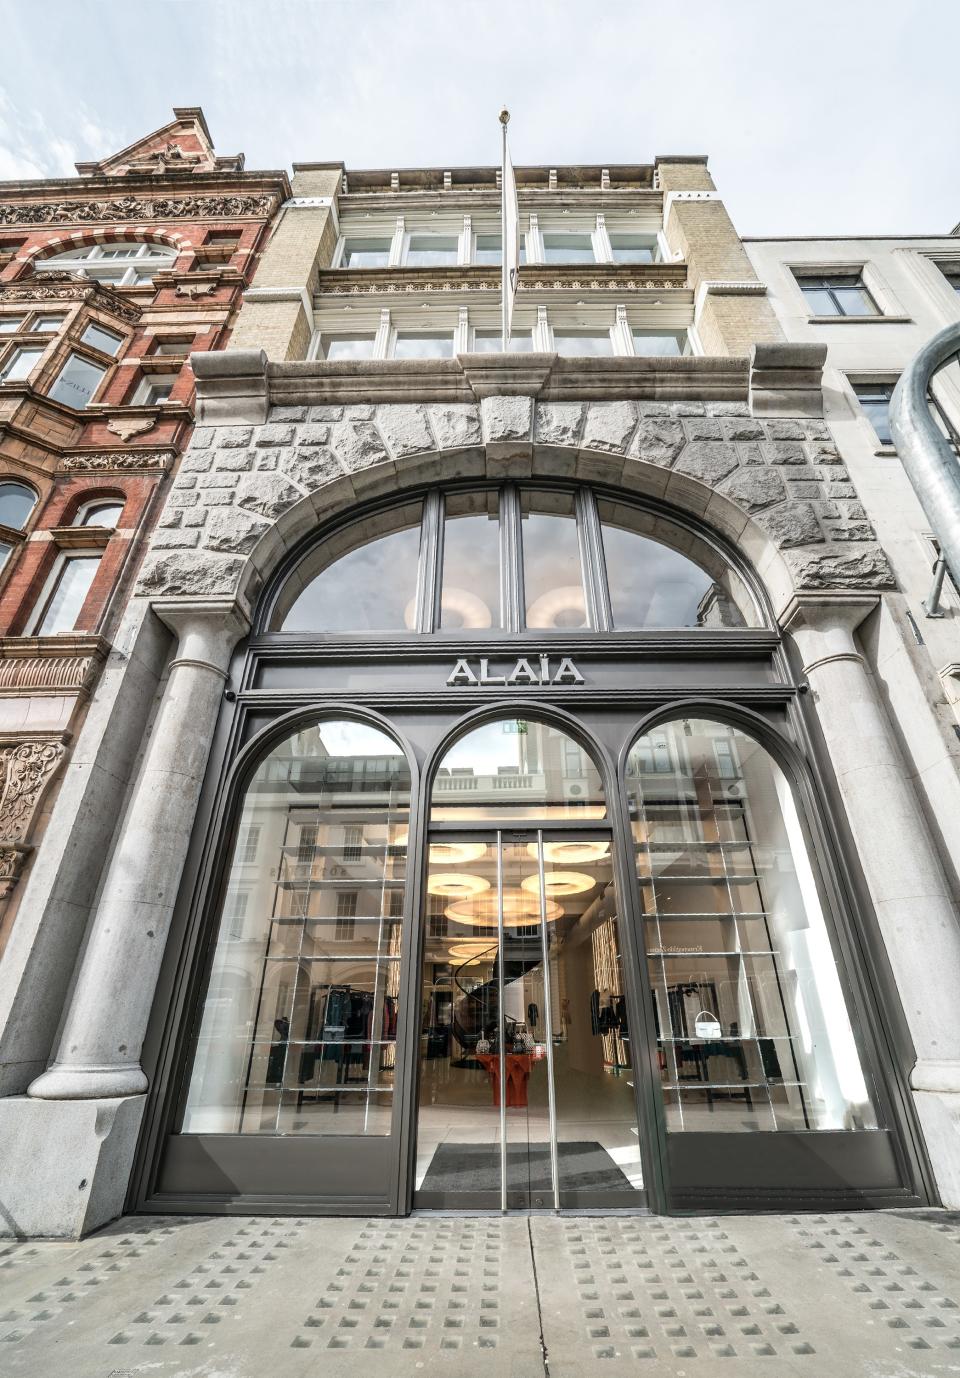 Inside London’s new Azzedine Alaïa store with Carla Sozzani, the cochair of the foundation dedicated to safeguarding and promoting the couturier’s legacy.